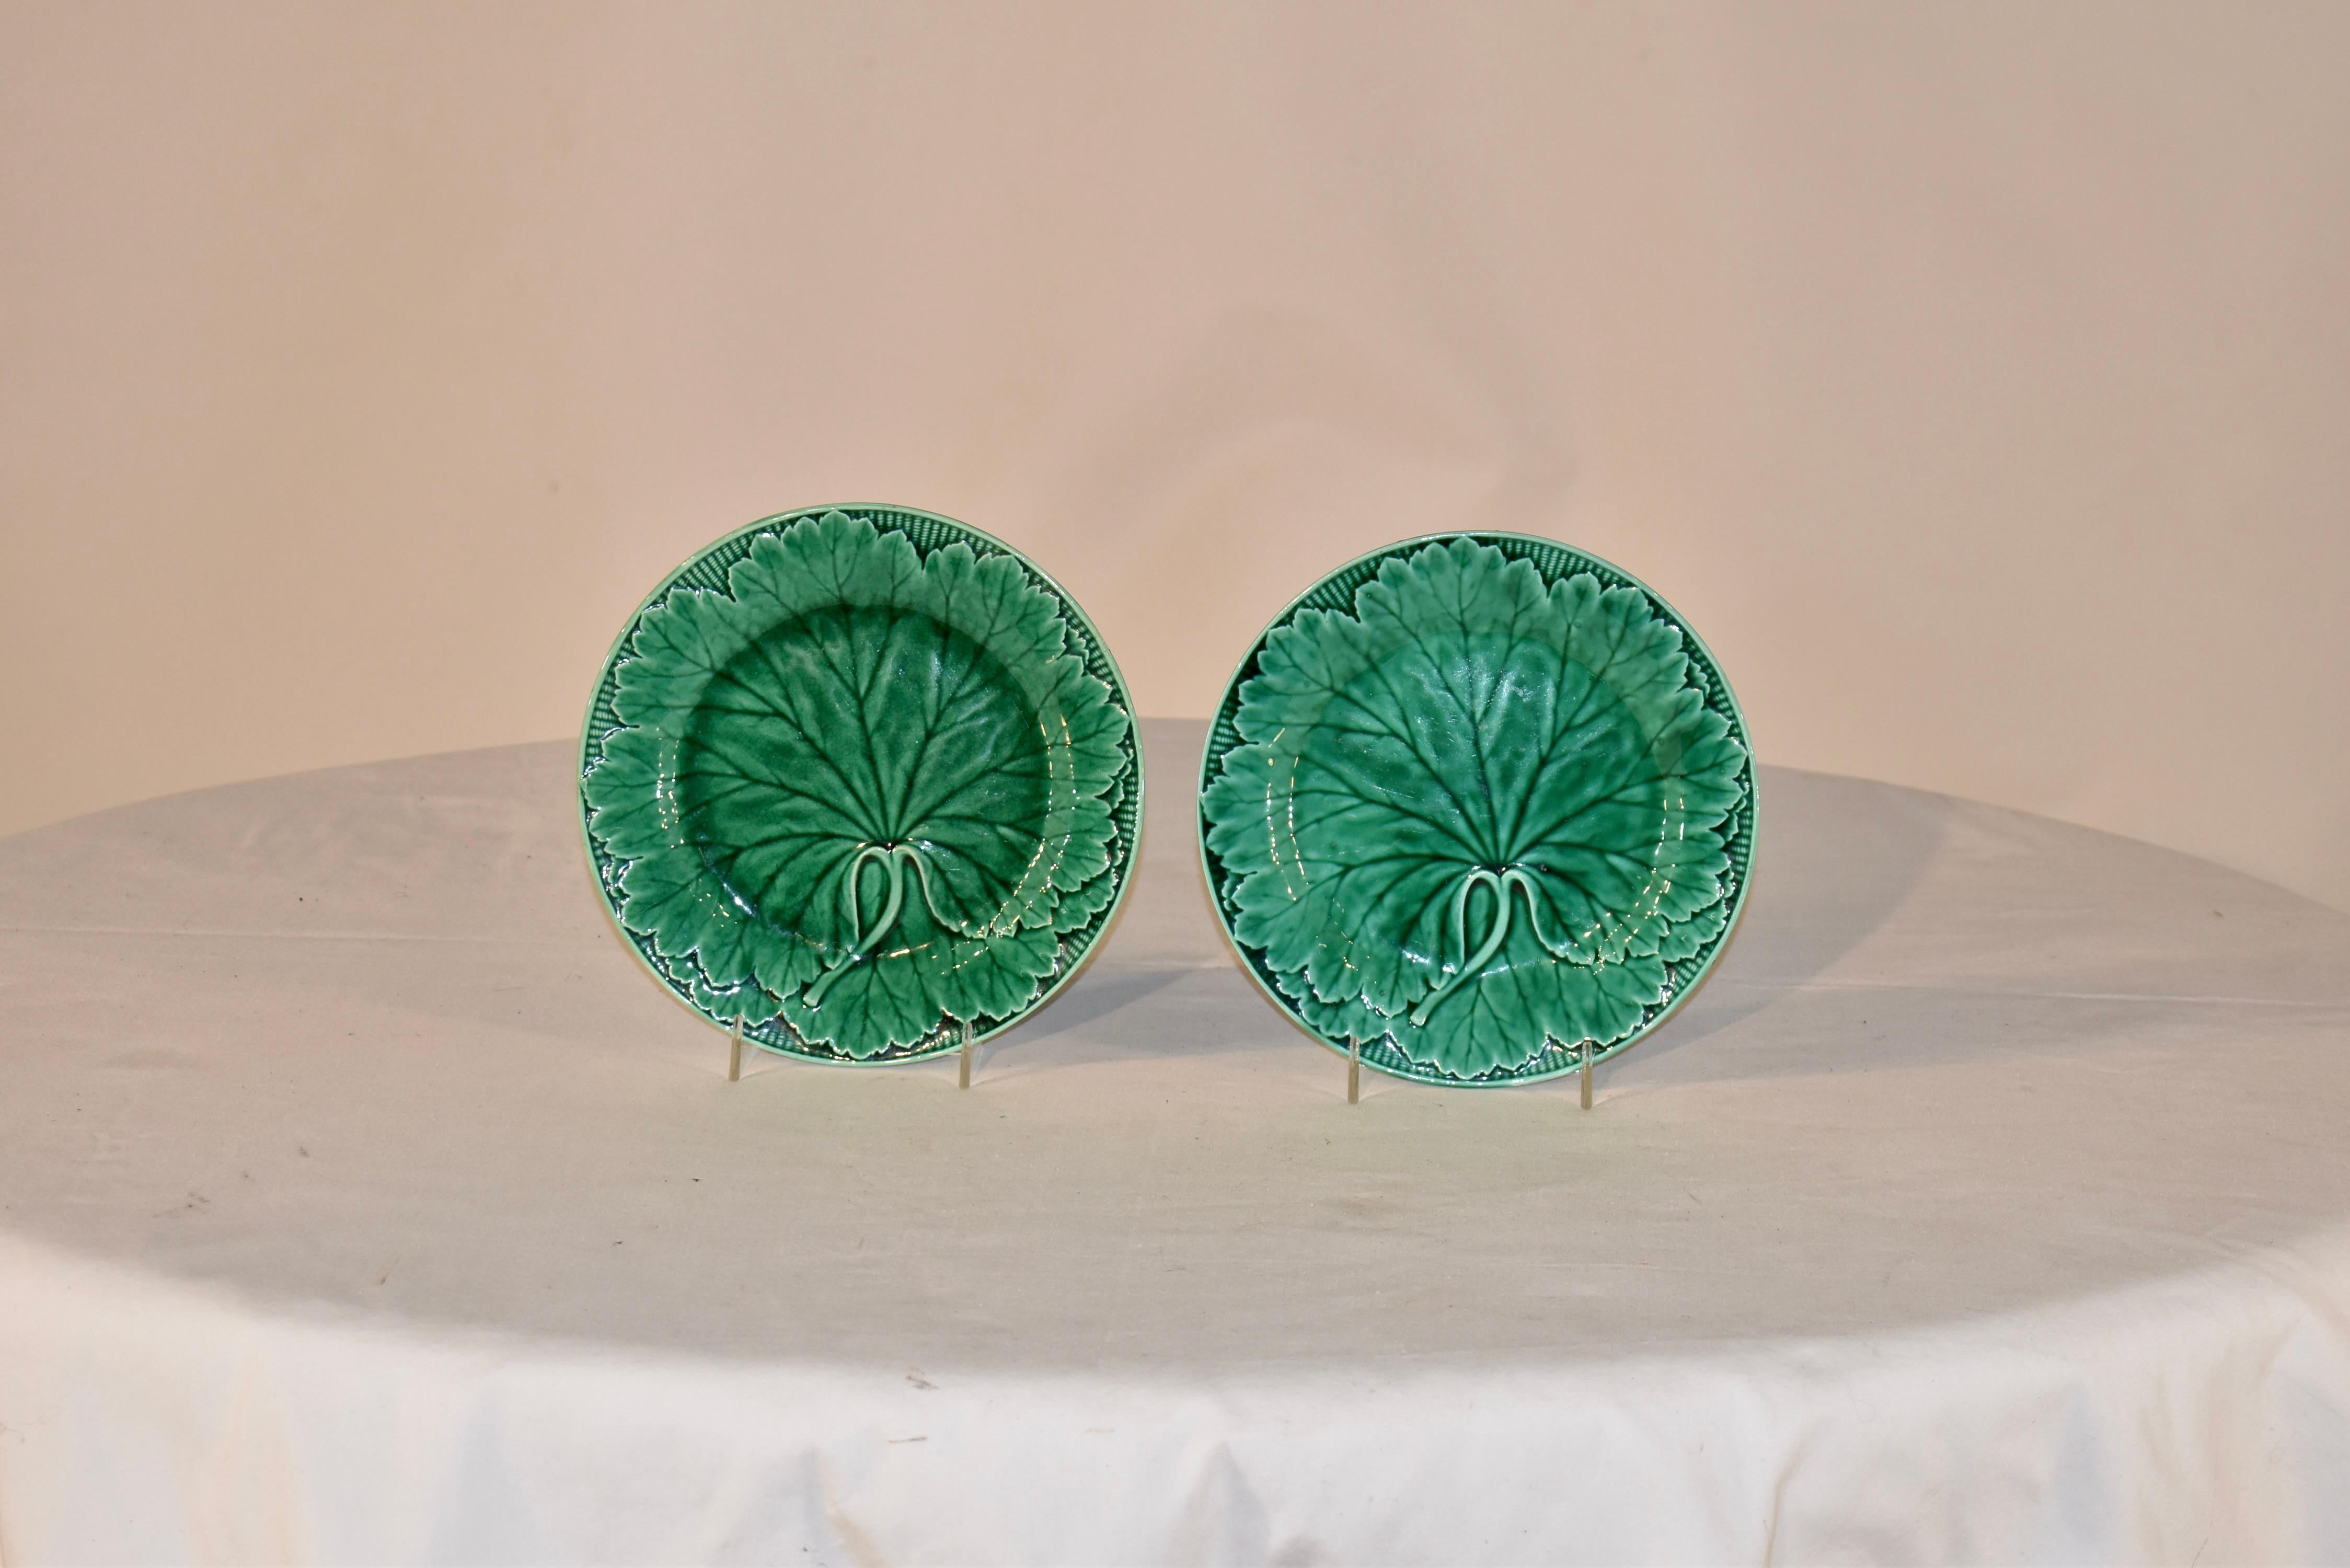 Glazed Pair of 19th Century Wedgwood Majolica Plates For Sale